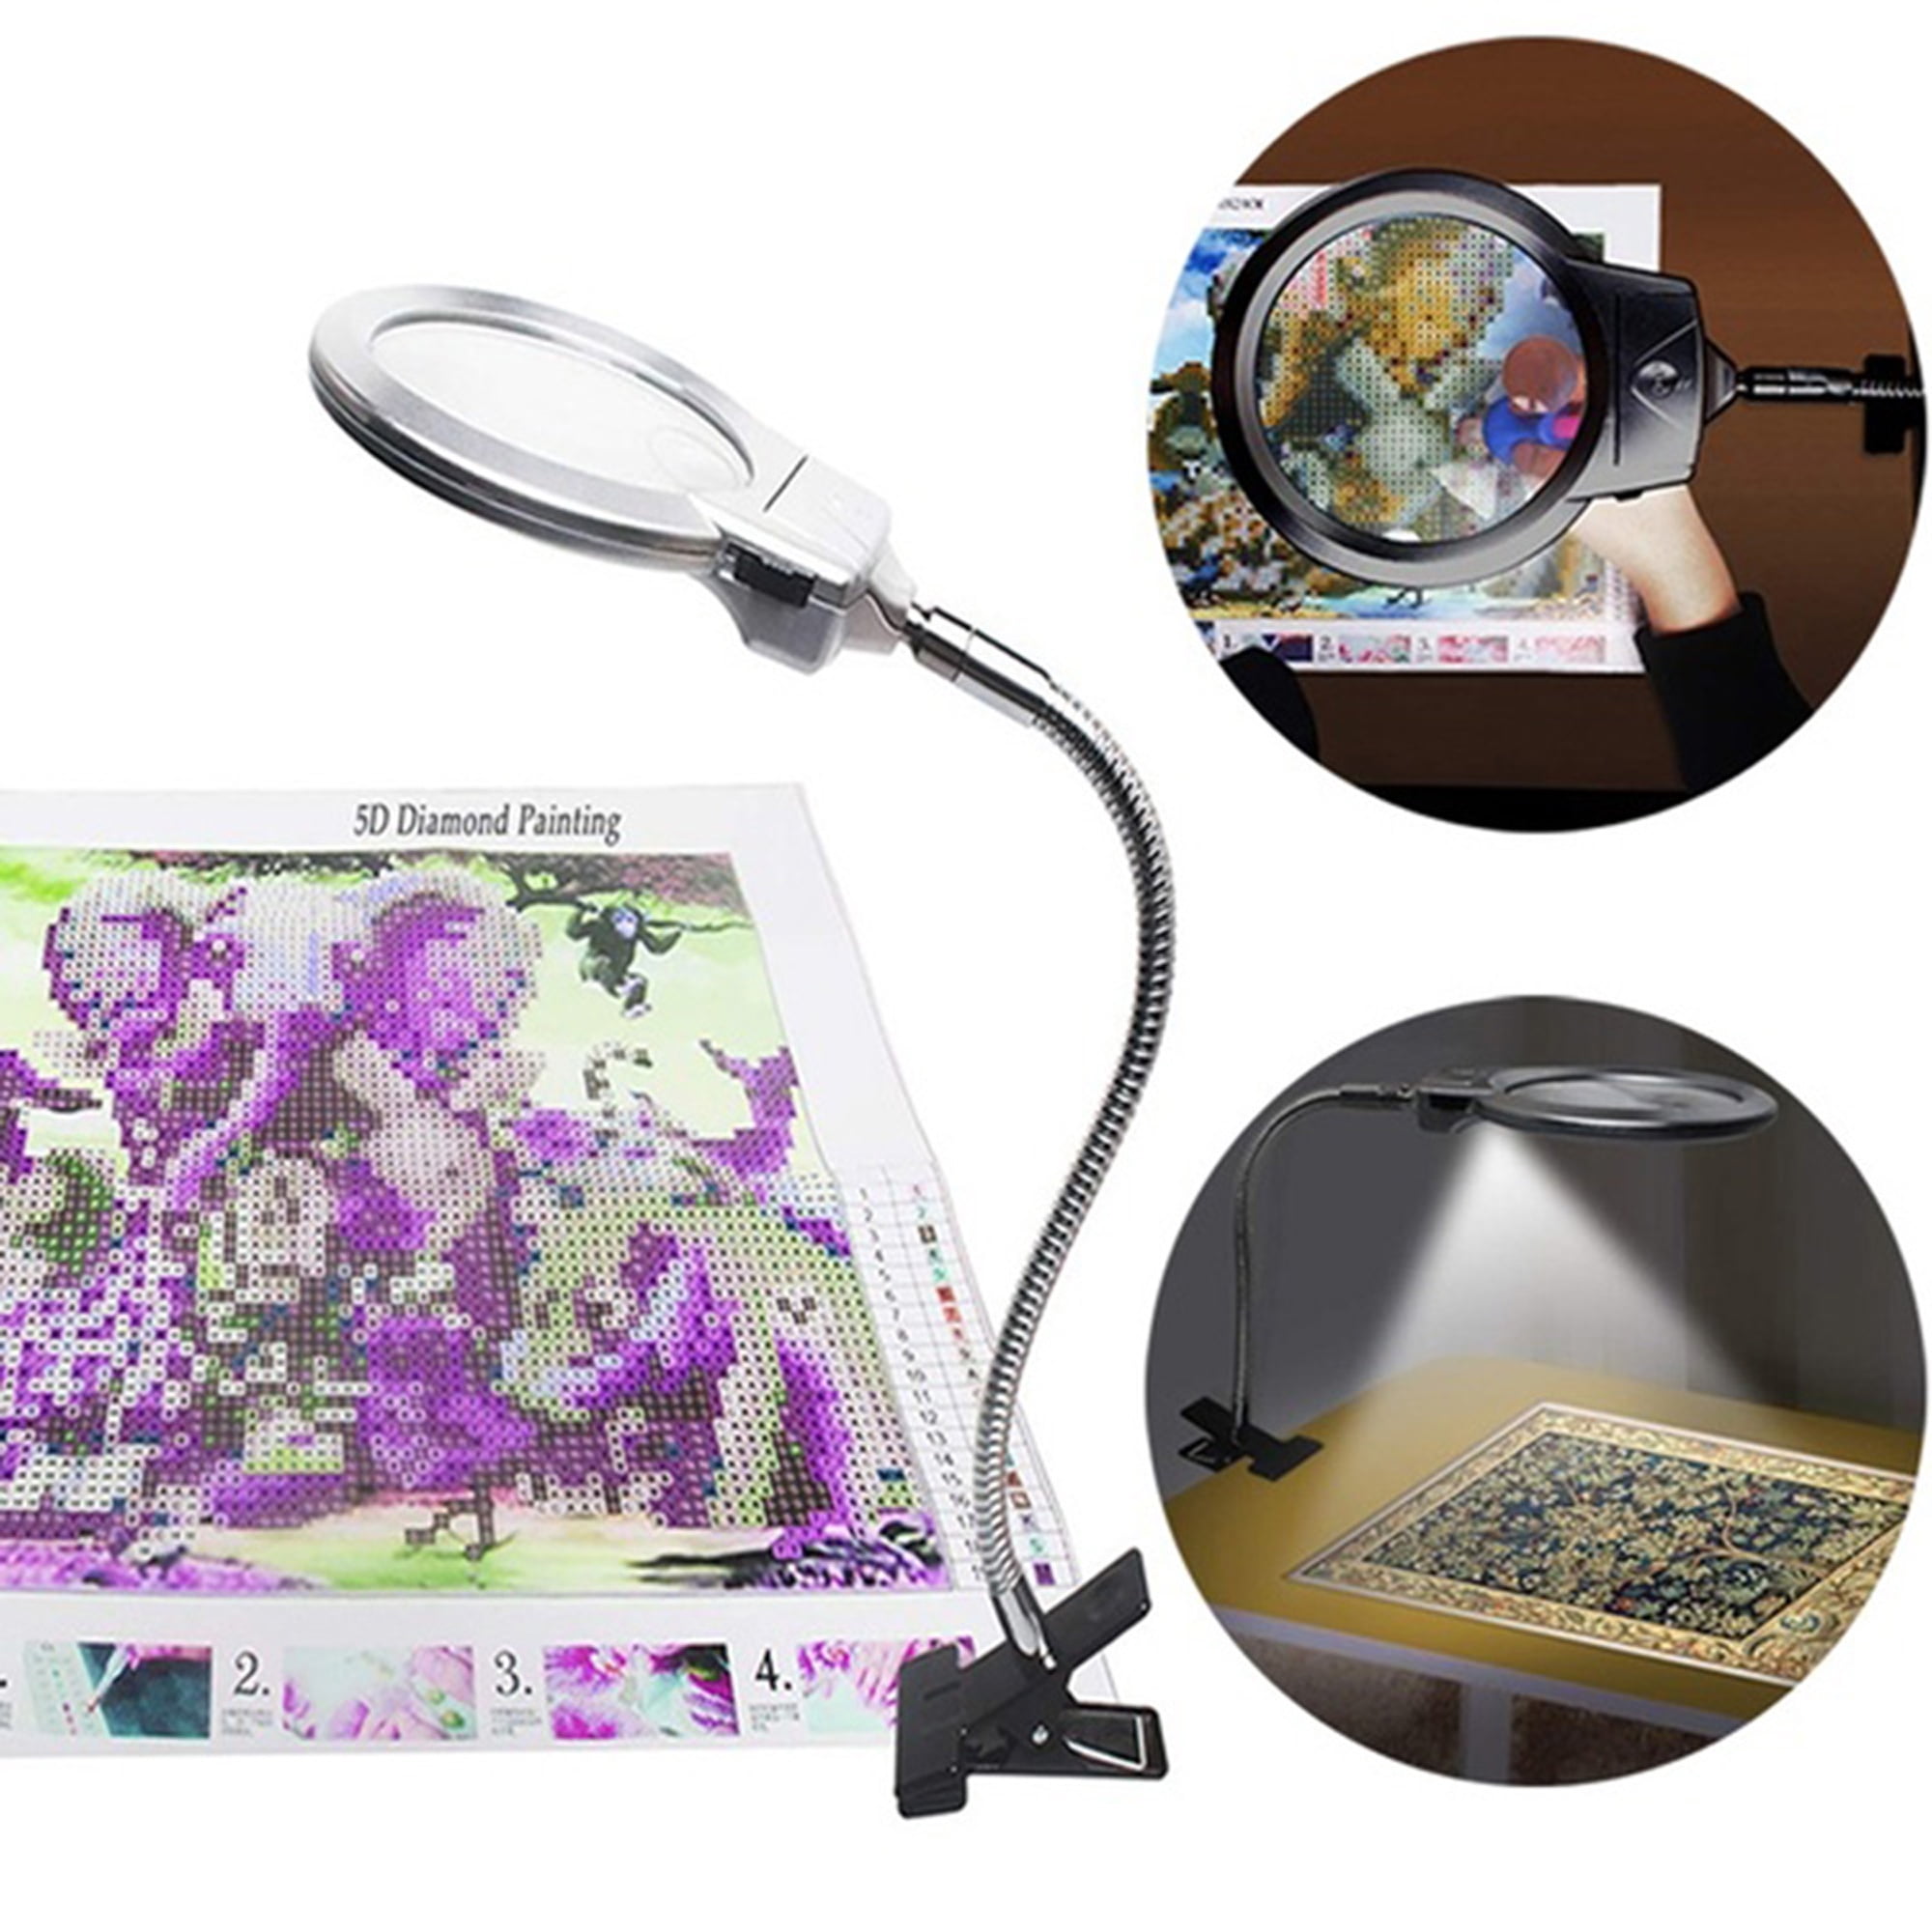 Justech LED Illuminated Magnifier with Stand 2X 6X Magnification Hands Free for Reading Crafts Inspection Needlework Hobbies